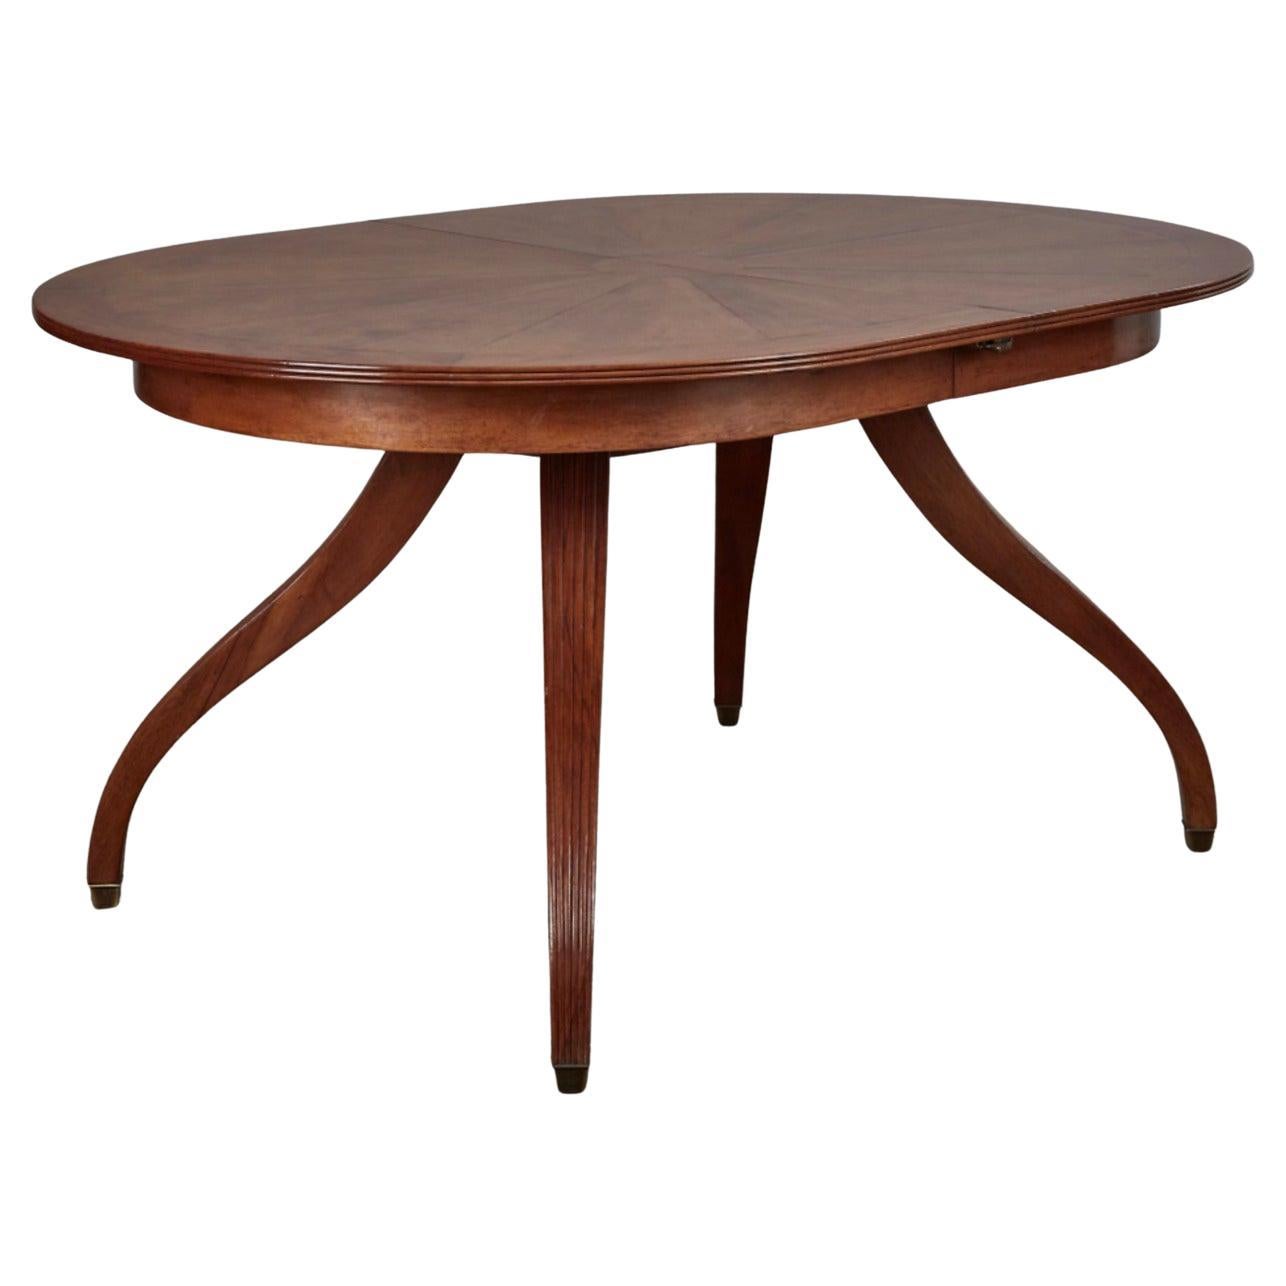 A Rose Tarlow Dining table in Medium Walnut finish Starburst patter Top with one extension leaf.  

Rose Tarlow is not only famous for being Oprah Winfrey's Designer, she also has the most impeccable furniture and accessories.   Rose Tarlow's pieces